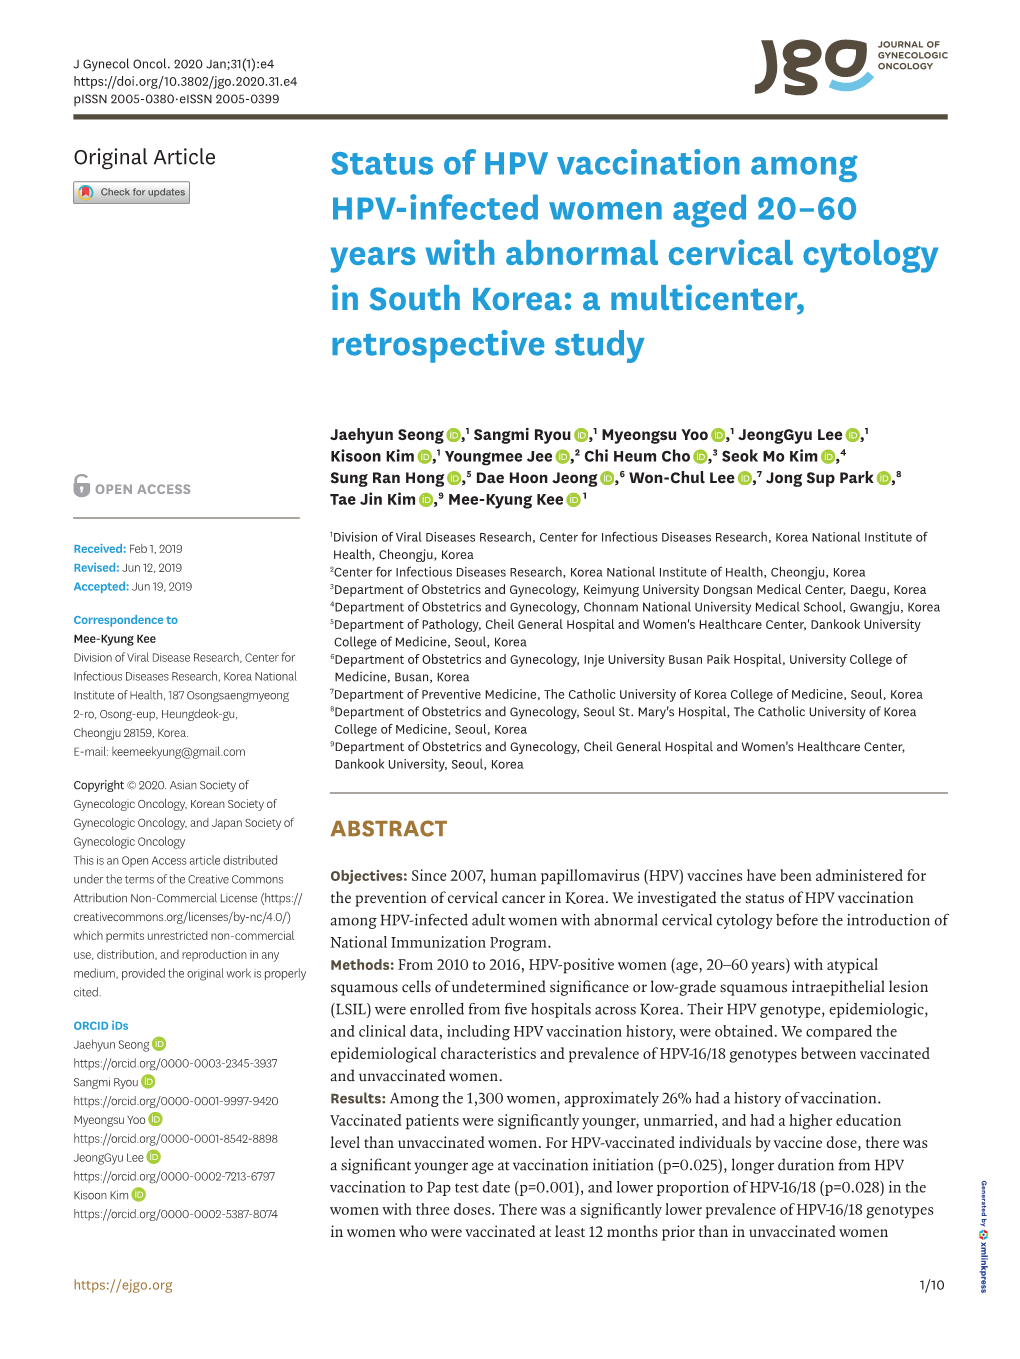 Status of HPV Vaccination Among HPV-Infected Women Aged 20–60 Years with Abnormal Cervical Cytology in South Korea: a Multicenter, Retrospective Study